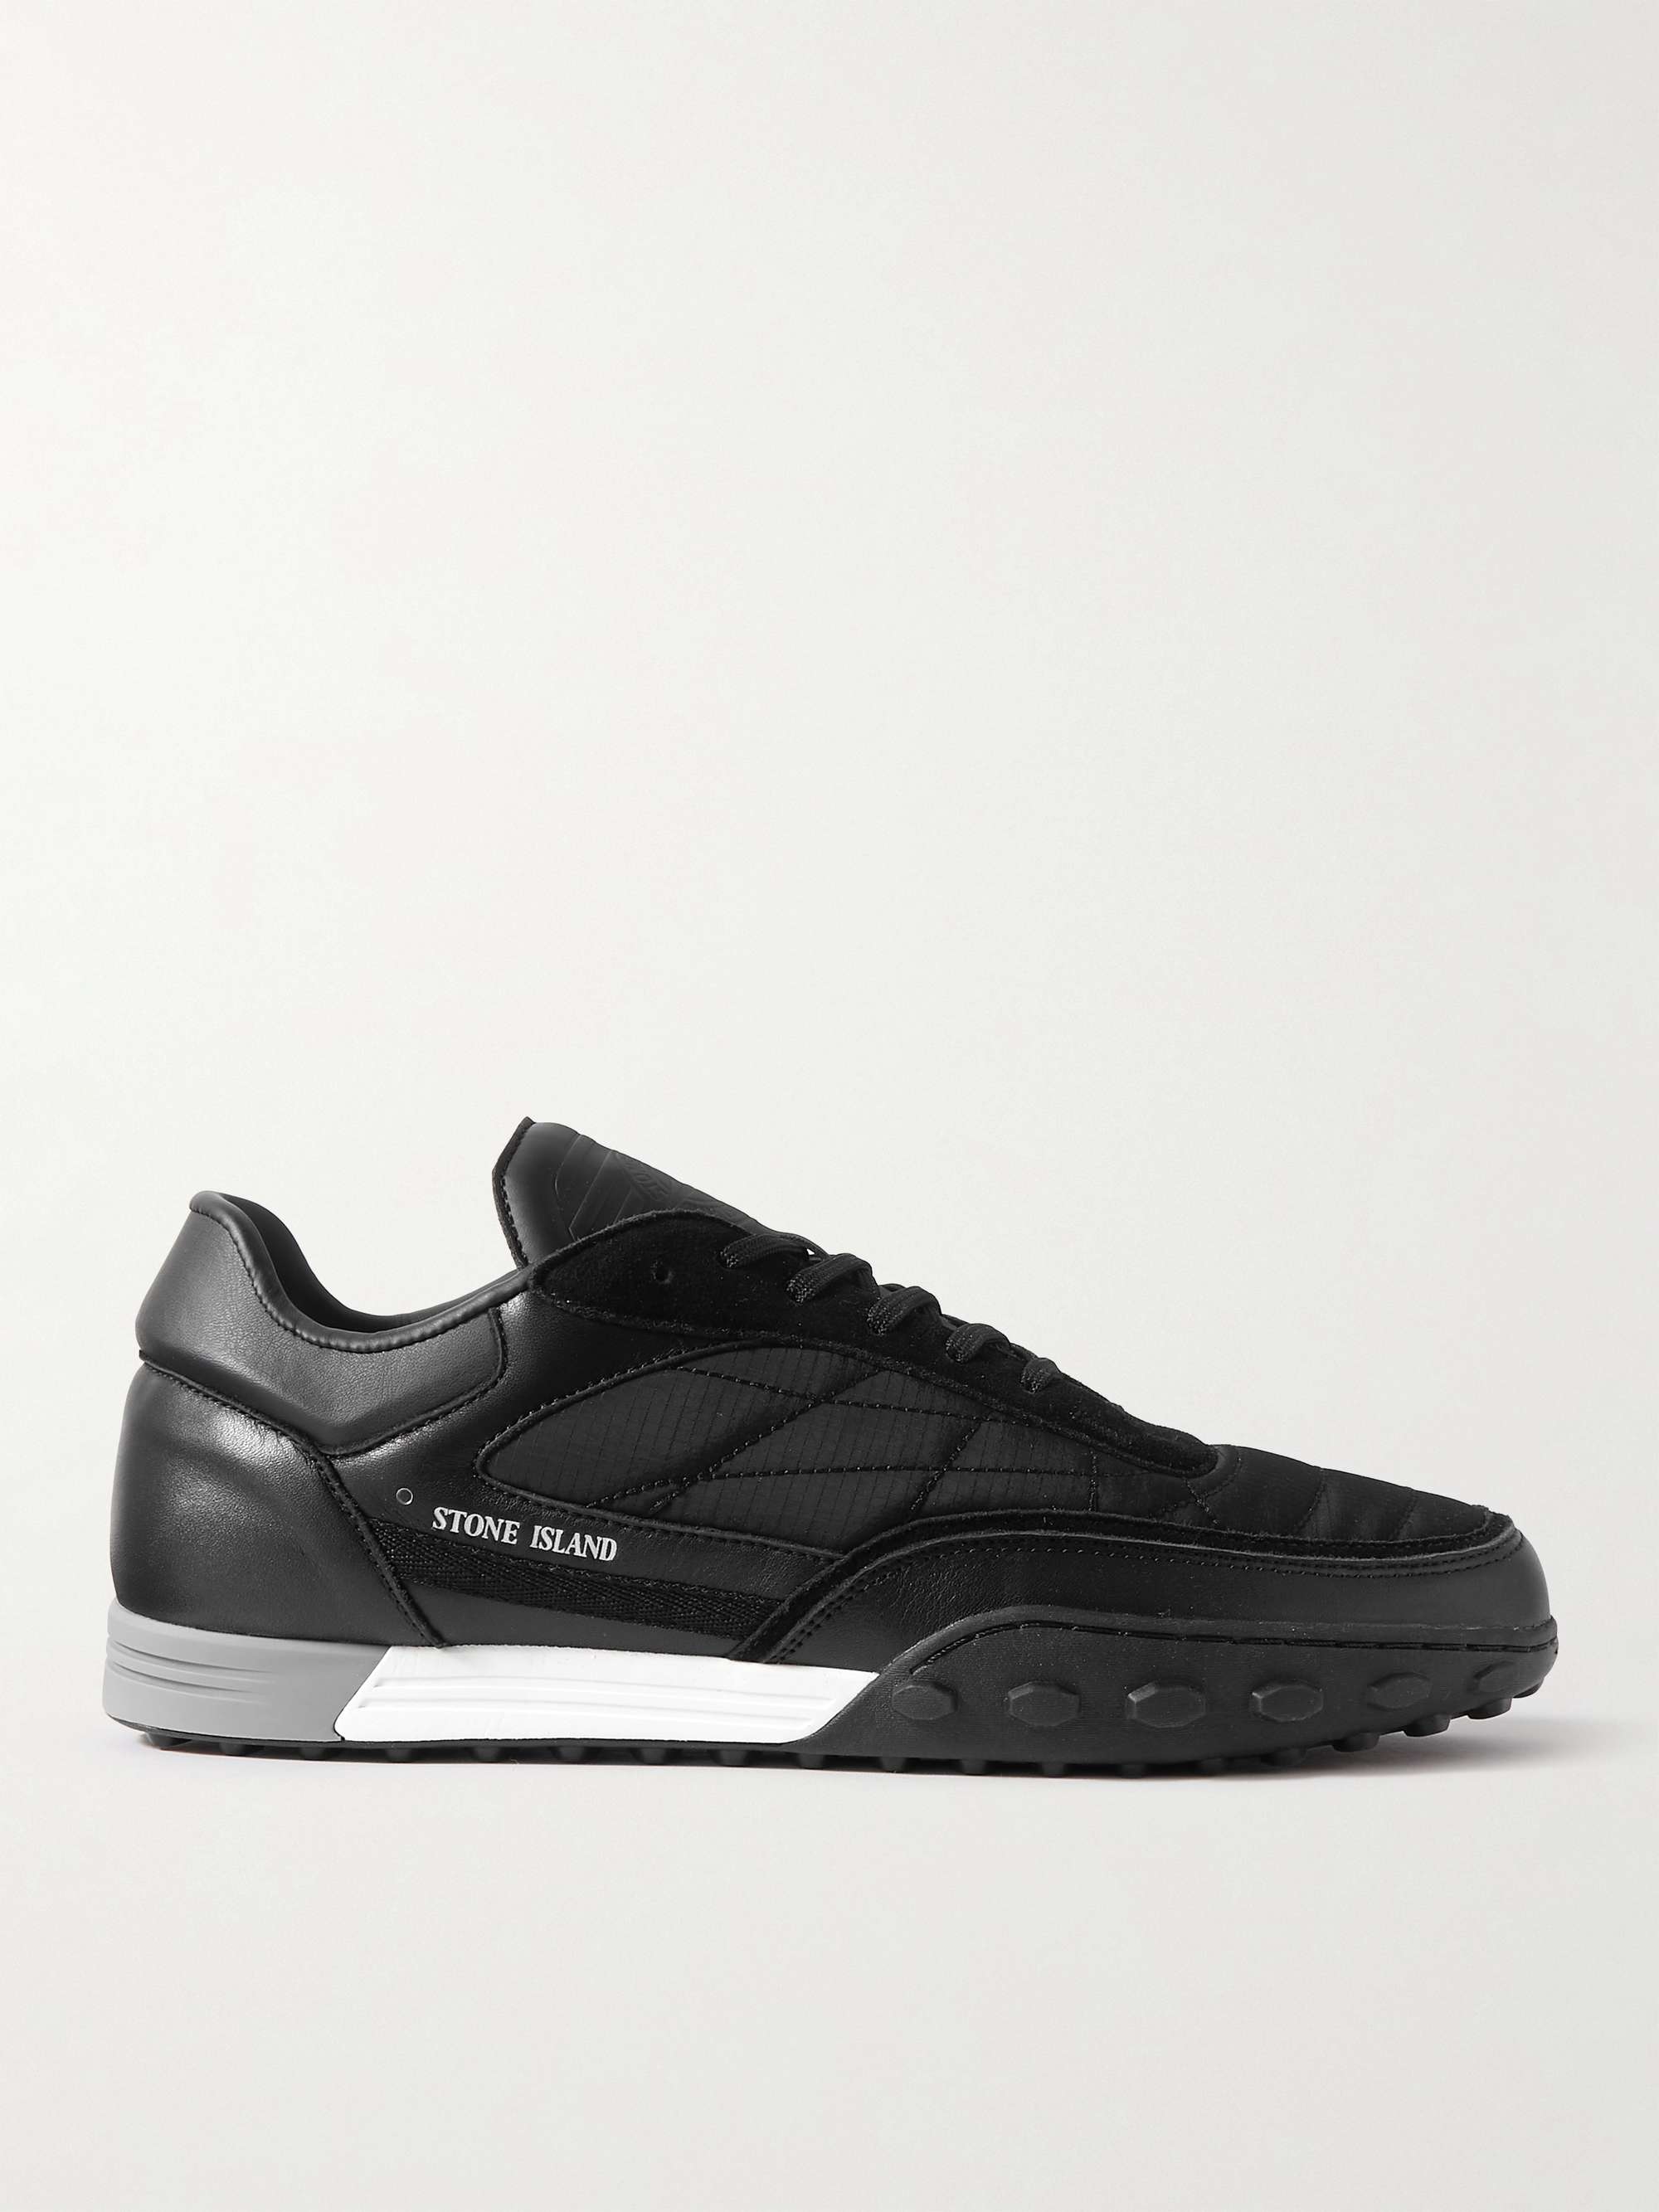 STONE ISLAND Football Leather, Suede and Canvas Sneakers for Men | MR PORTER